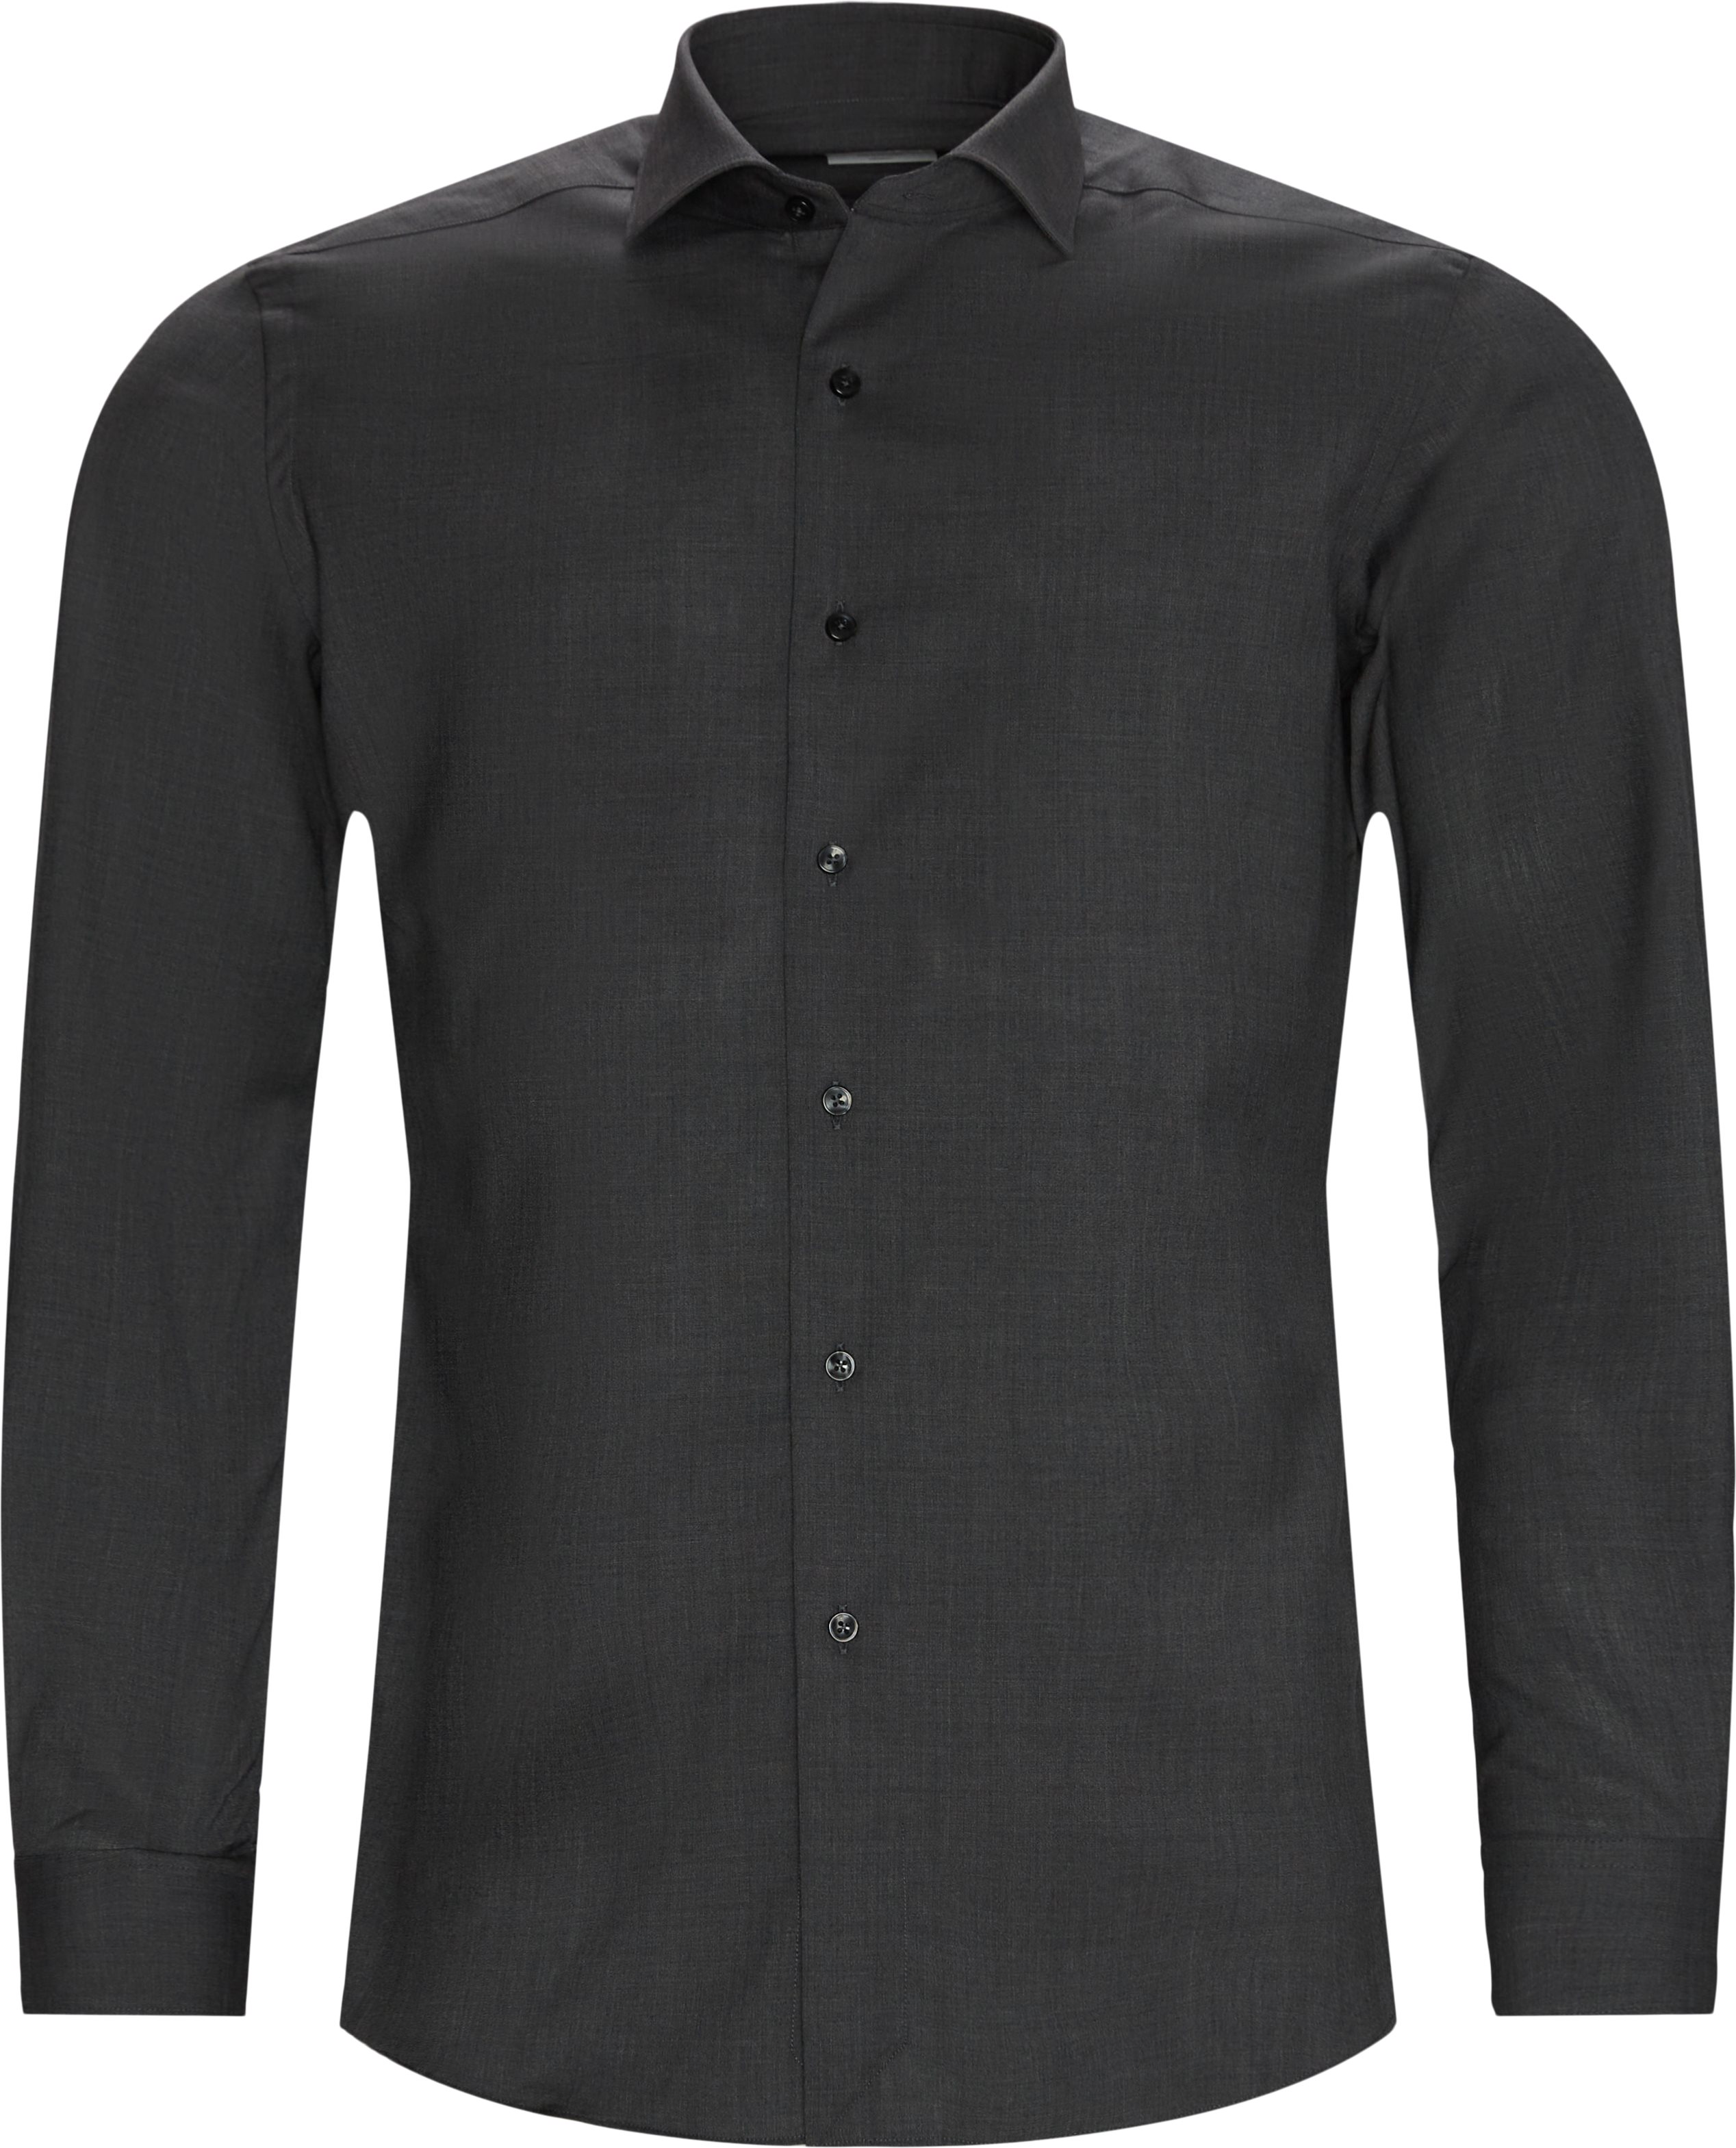 Shirts - Tailored fit - Grey